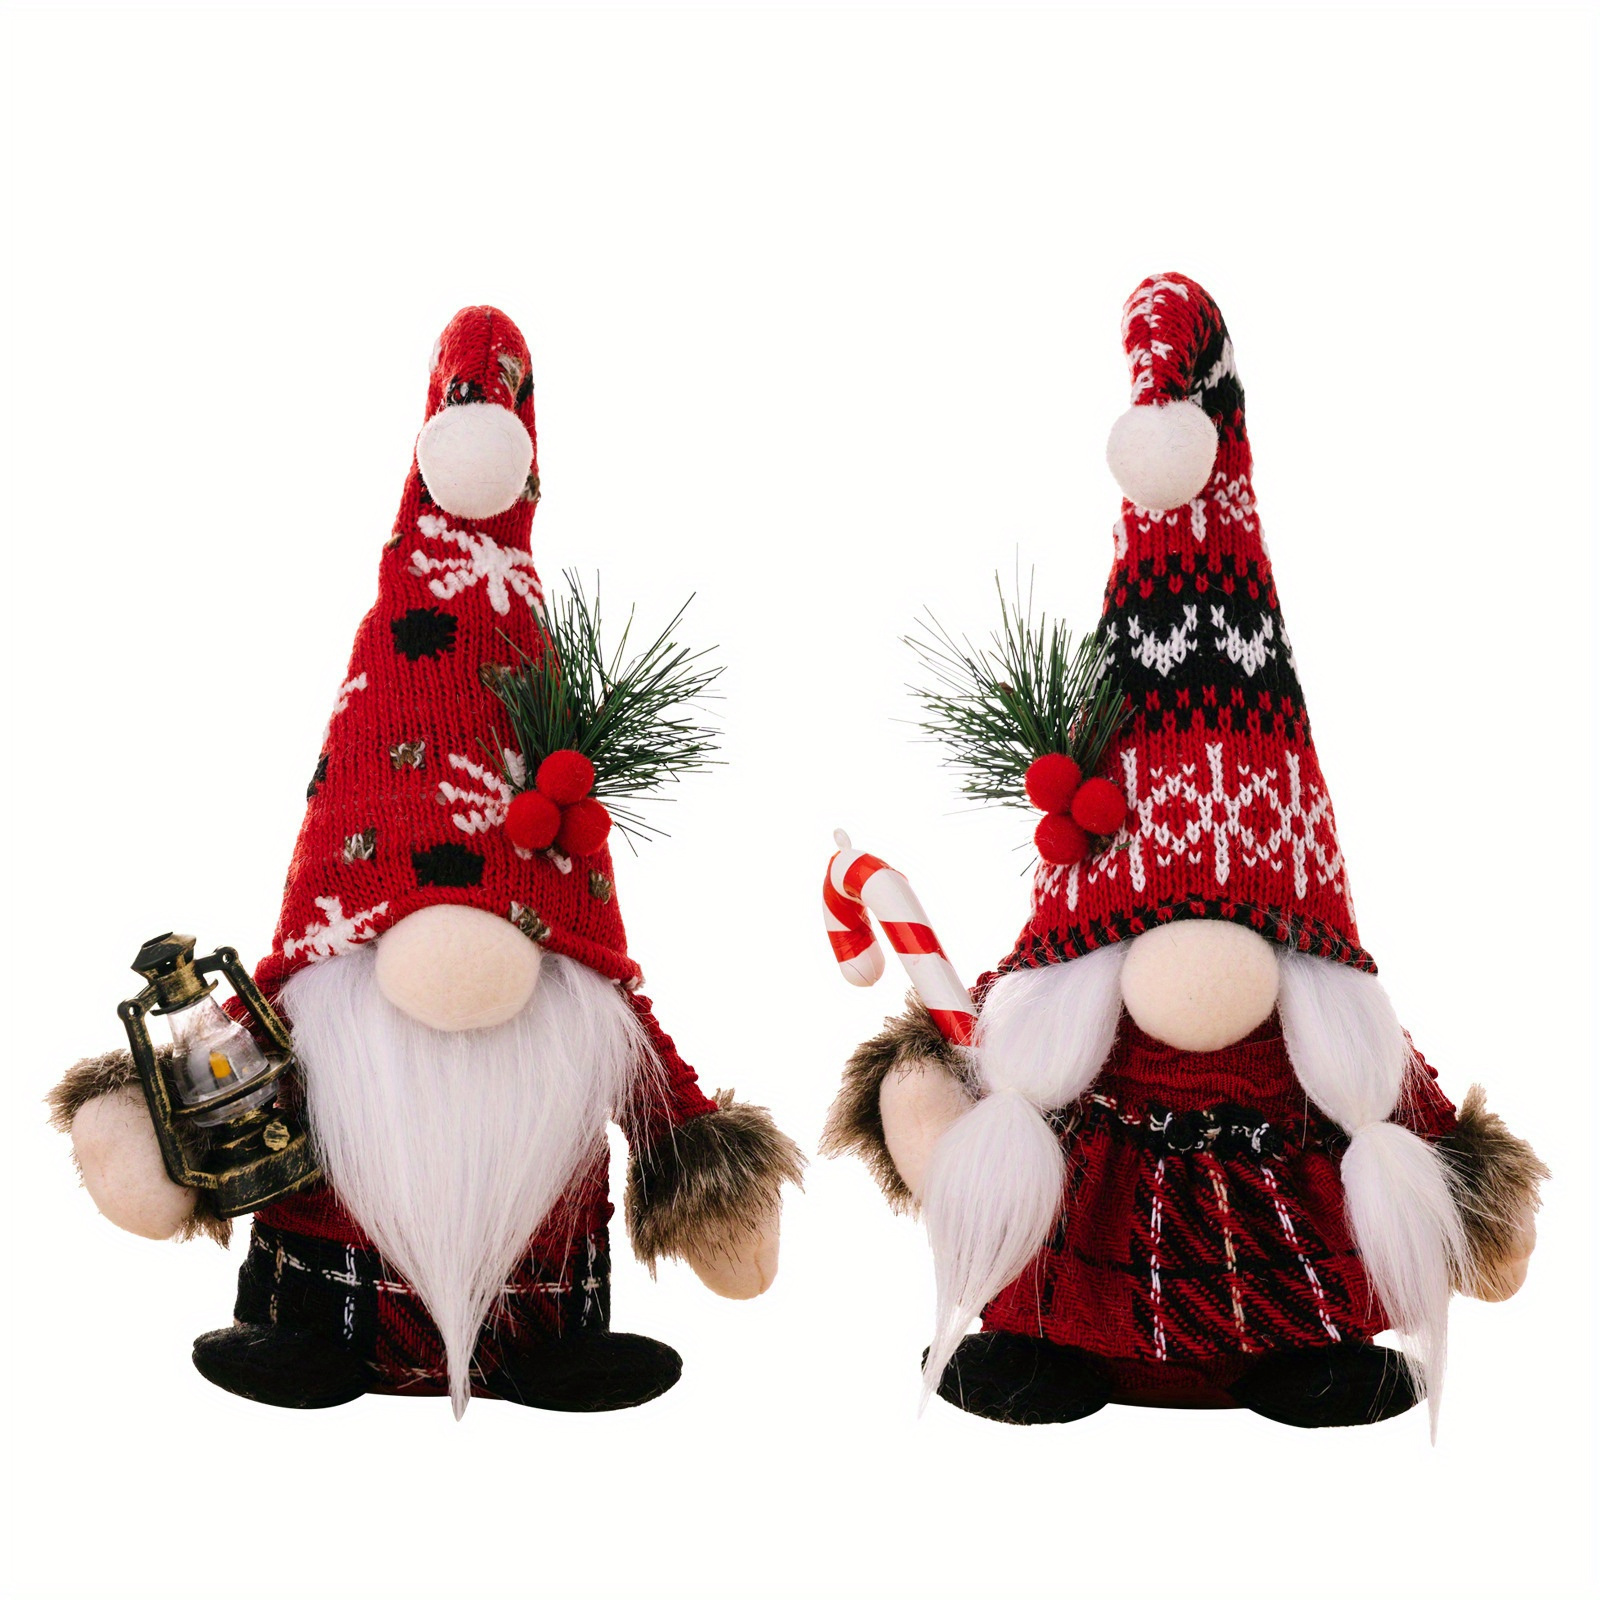 

Christmas Gnome Plush Dolls, Set Of 2, Knitted Cap Scandinavian Tomte Nisse Figurines With Lantern & Candy Cane, Festive Handmade Polyester No-face Elves, Non-electricity Tabletop Holiday Decorations